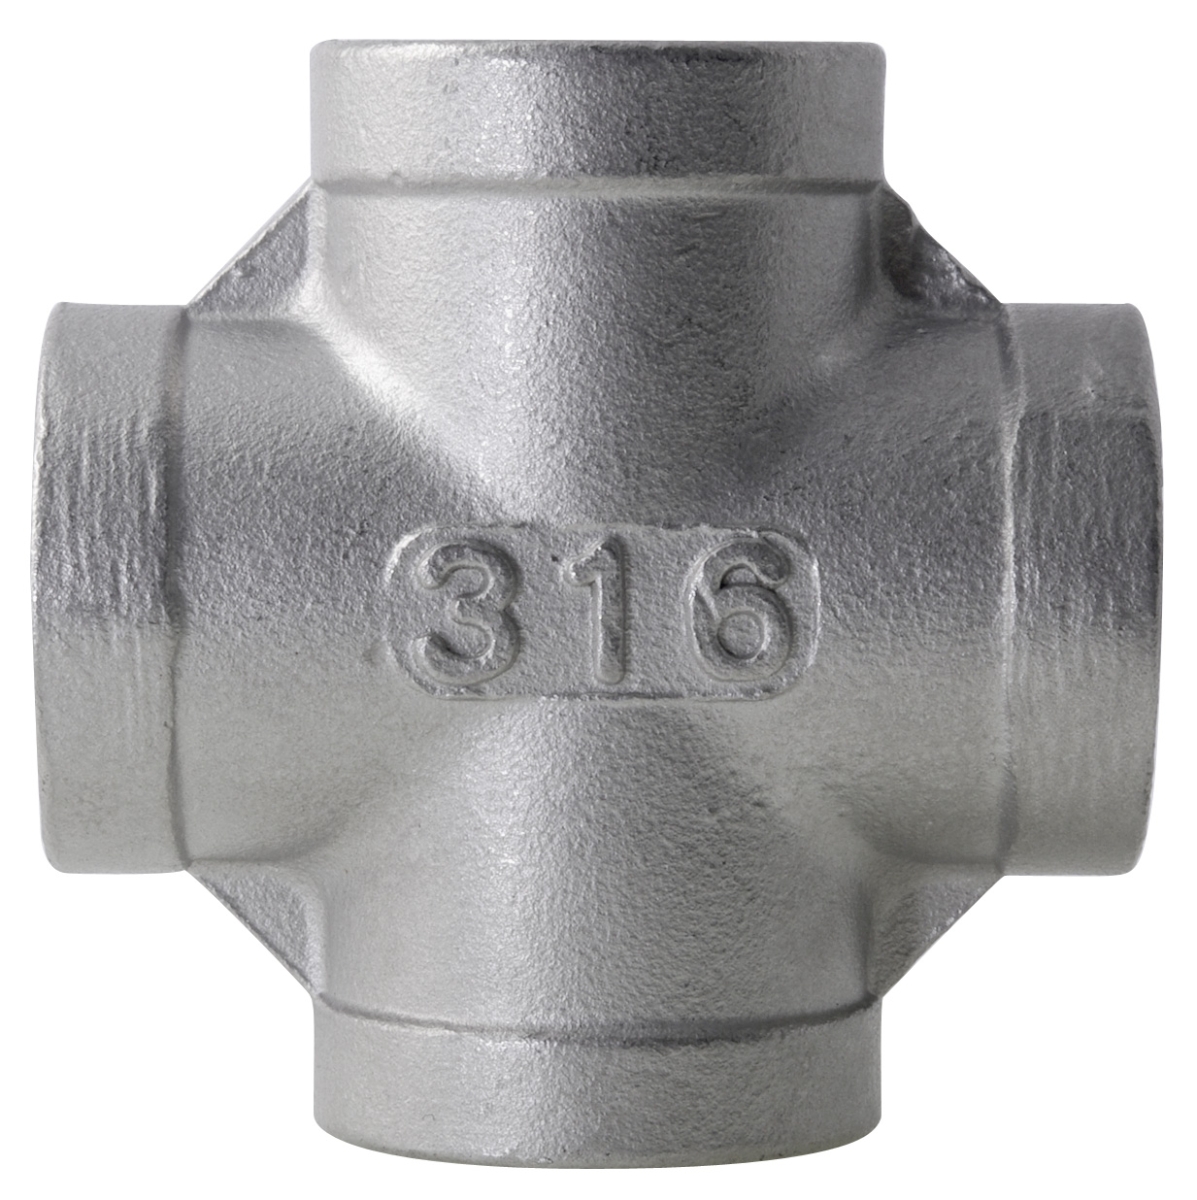 1" BSP Cross 316 Stainless Steel 150LB Pipe Fitting